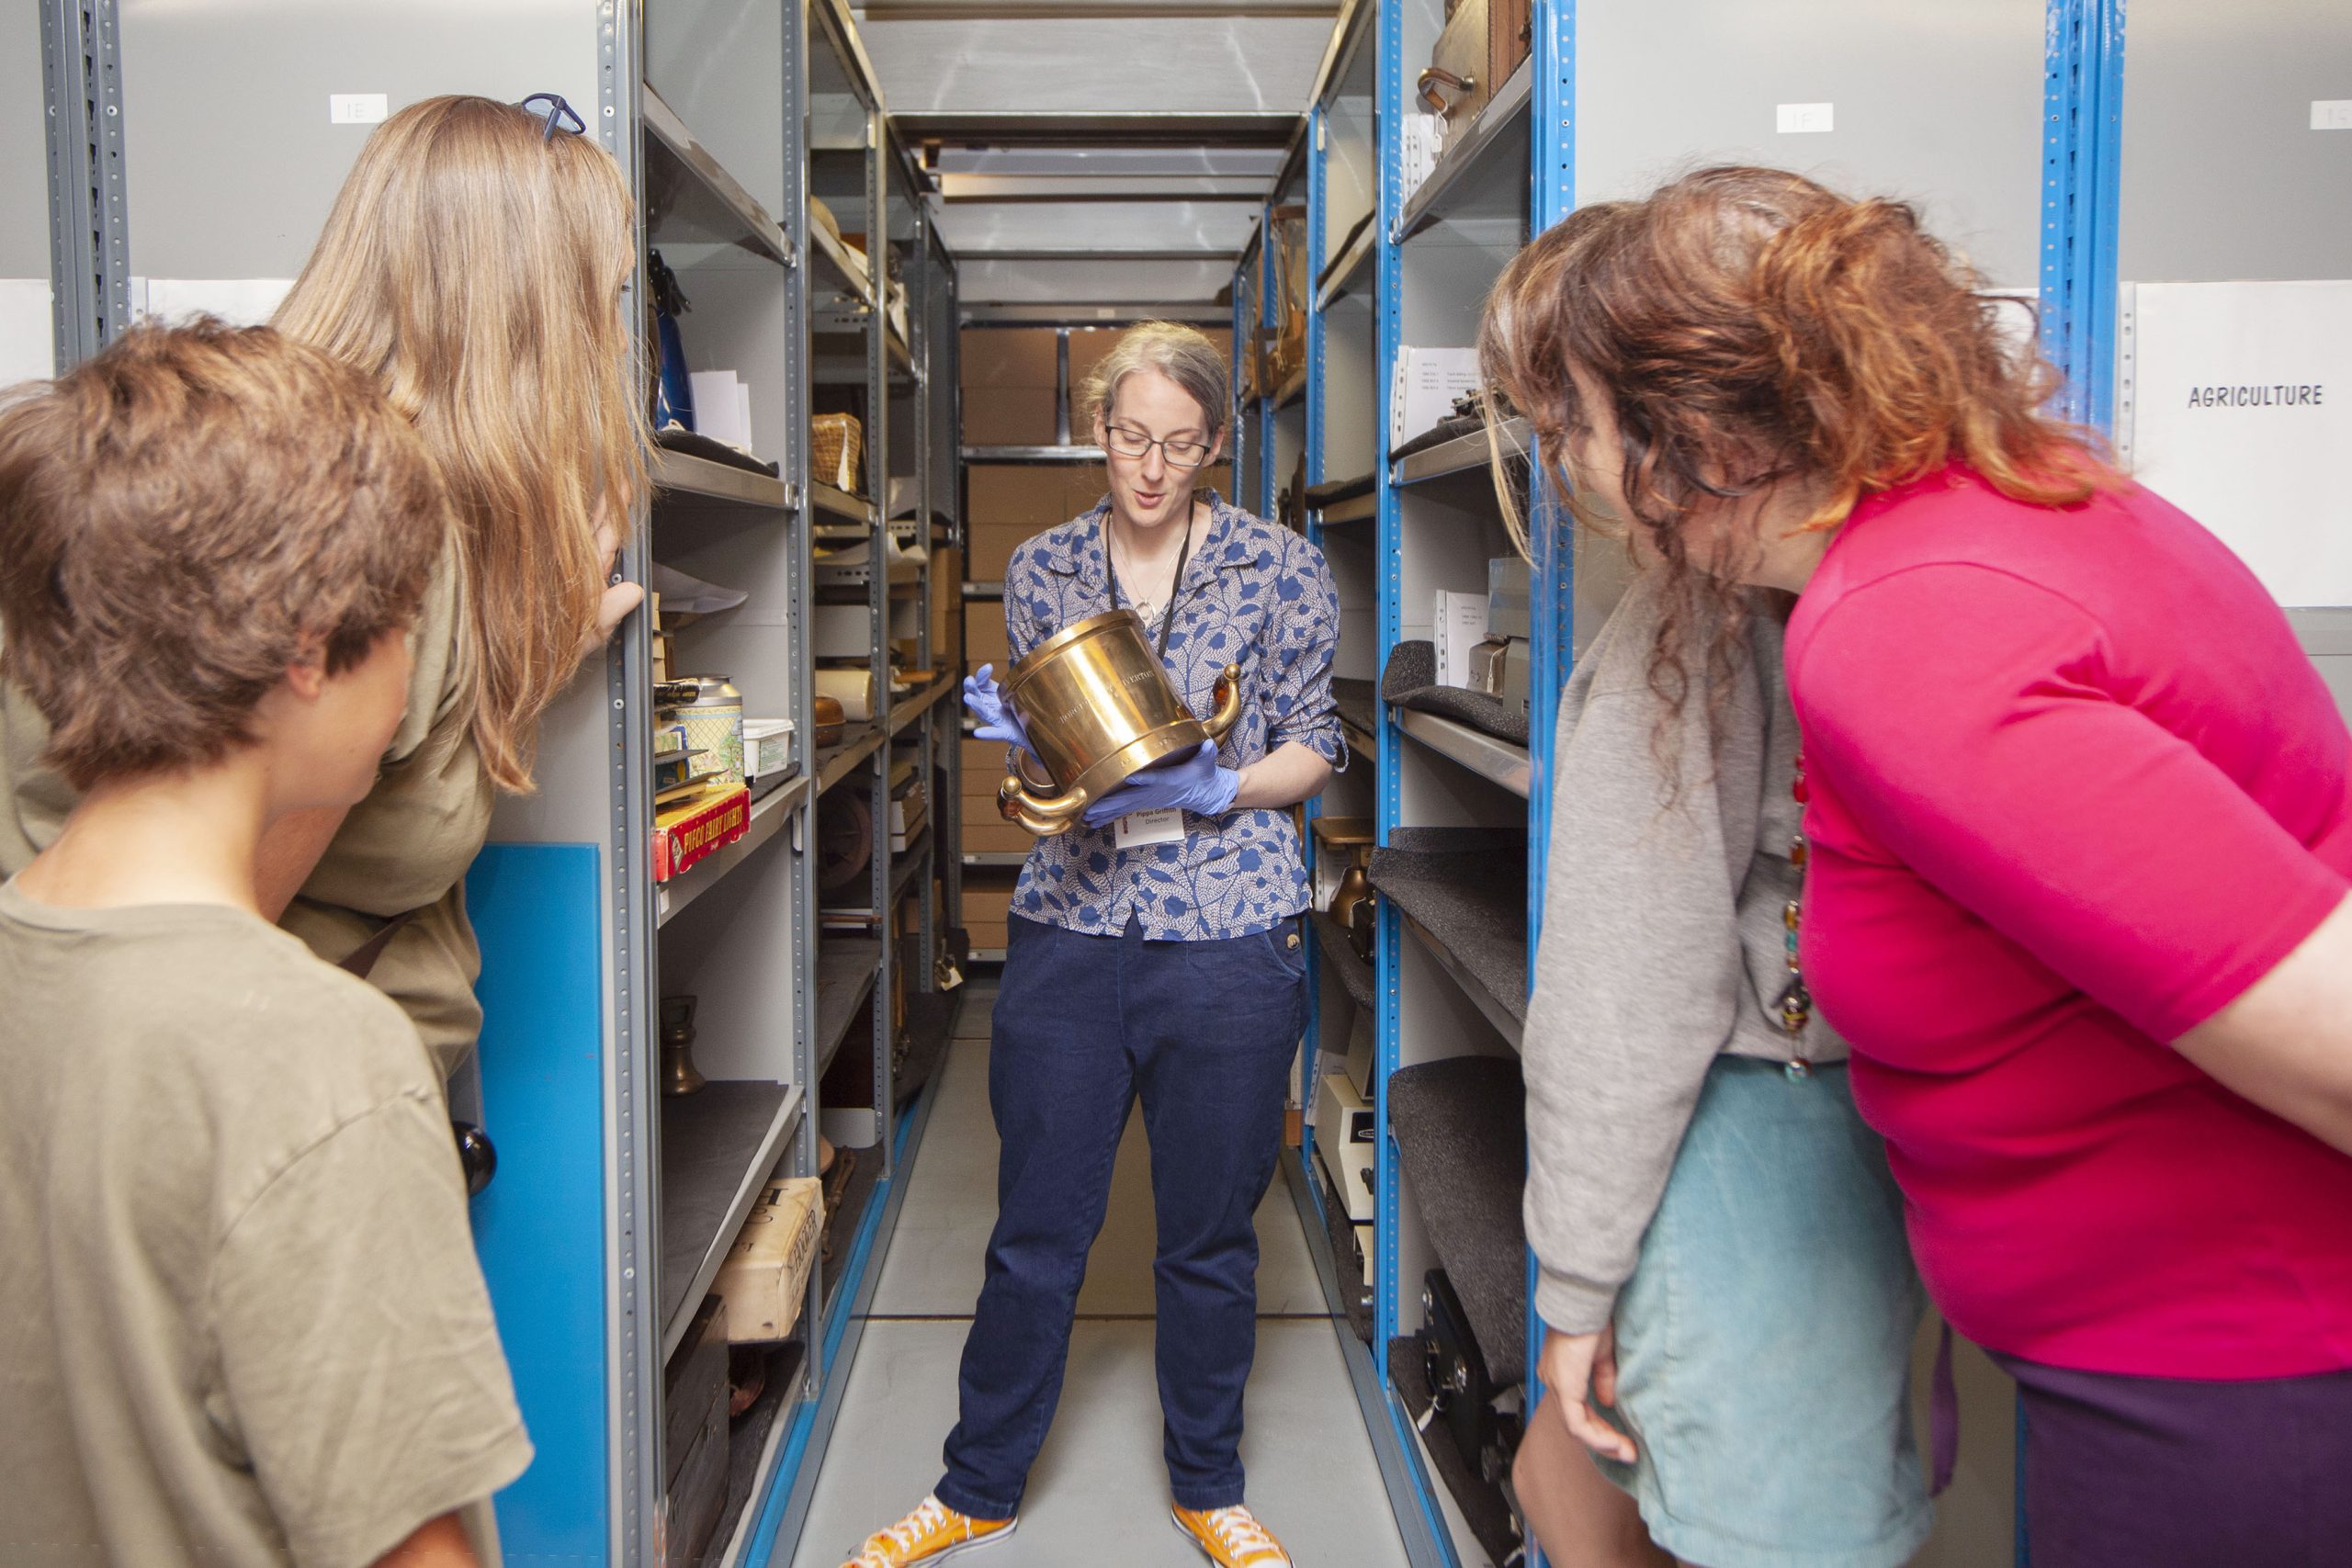 A woman standing in between some shelving units in a museum store, facing the camera. She is holding a brass object and there are other museum objects on the shelves around her. There are people peering around the end of the shelves looking at the woman.